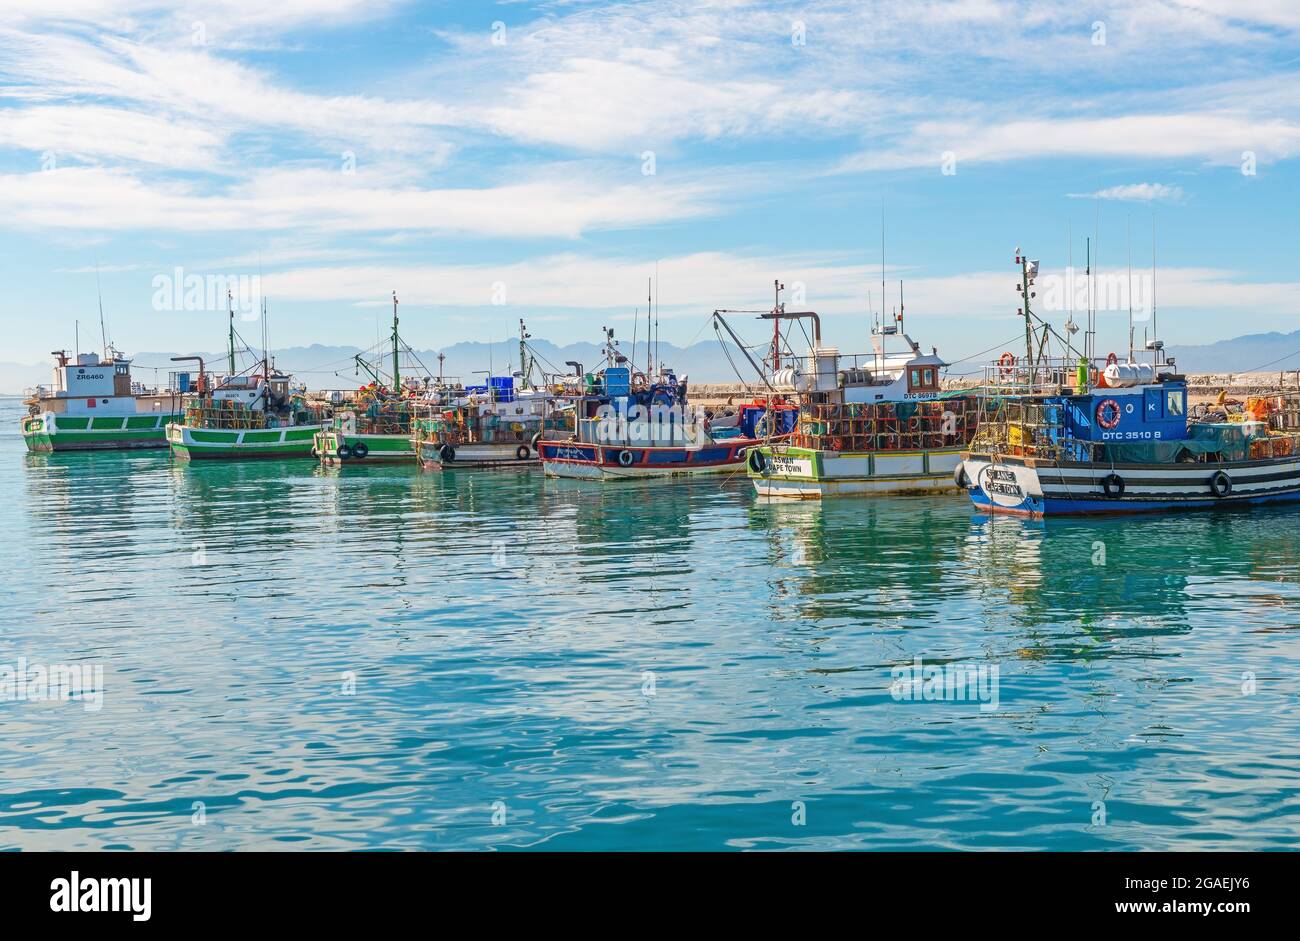 Fishing boats in Kalk Bay harbor on summer day, Cape Town, South Africa. Stock Photo